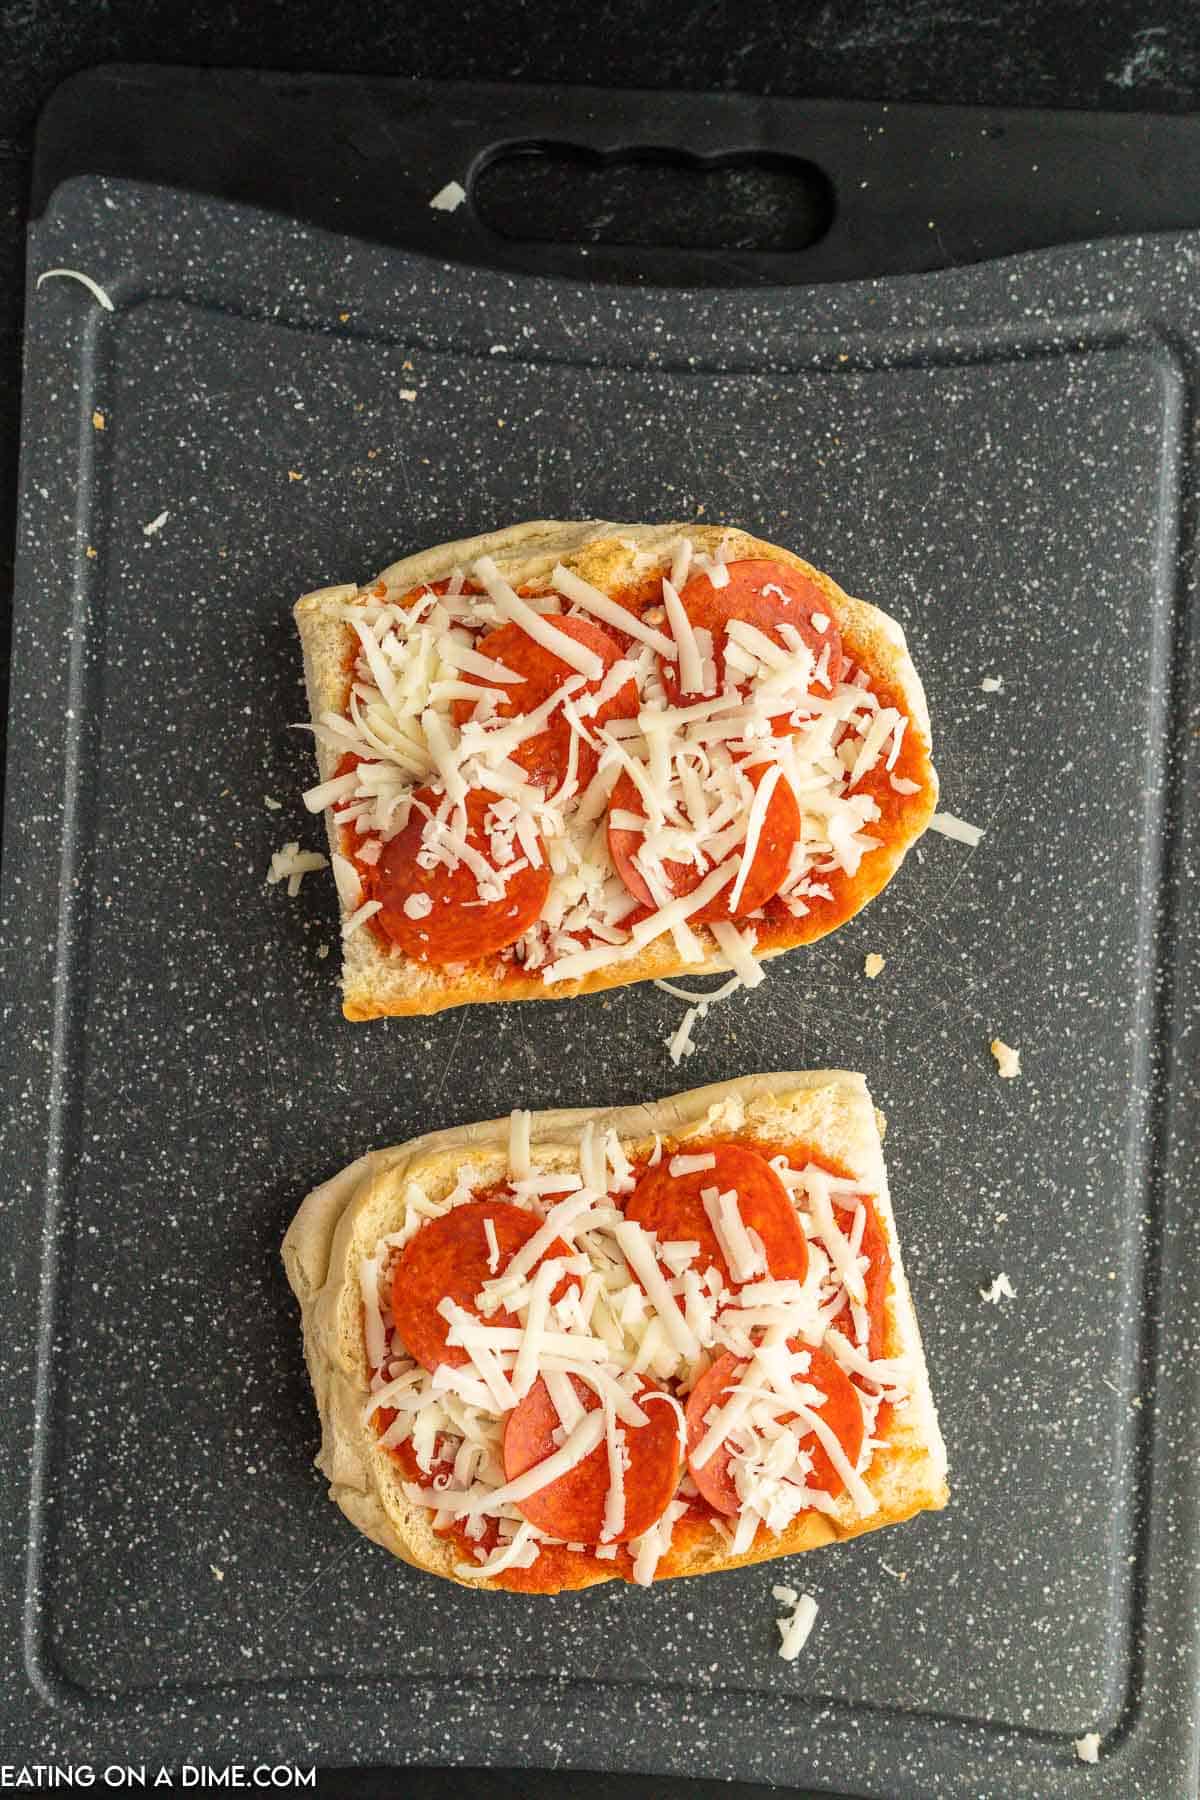 French Bread topped with pizza sauce, shredded cheese and pepperoni